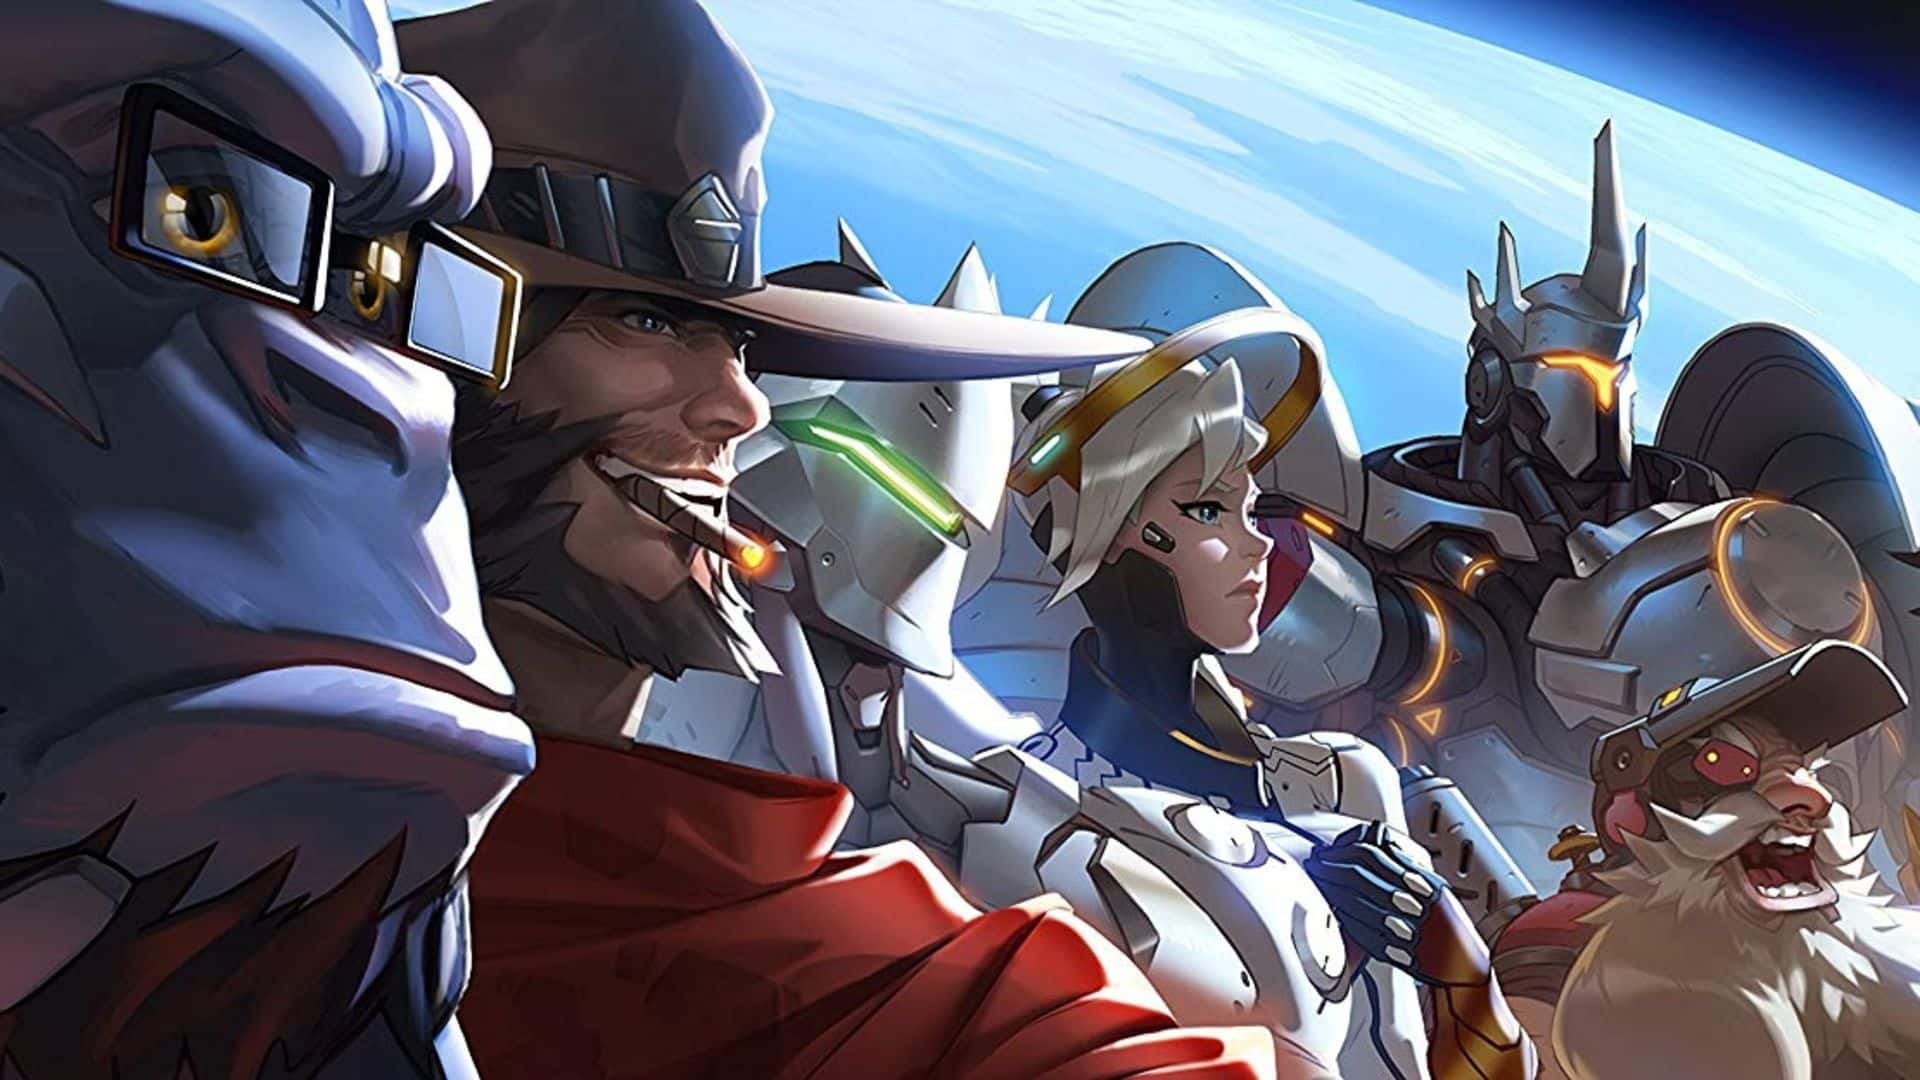 Overwatch characters look into the distance